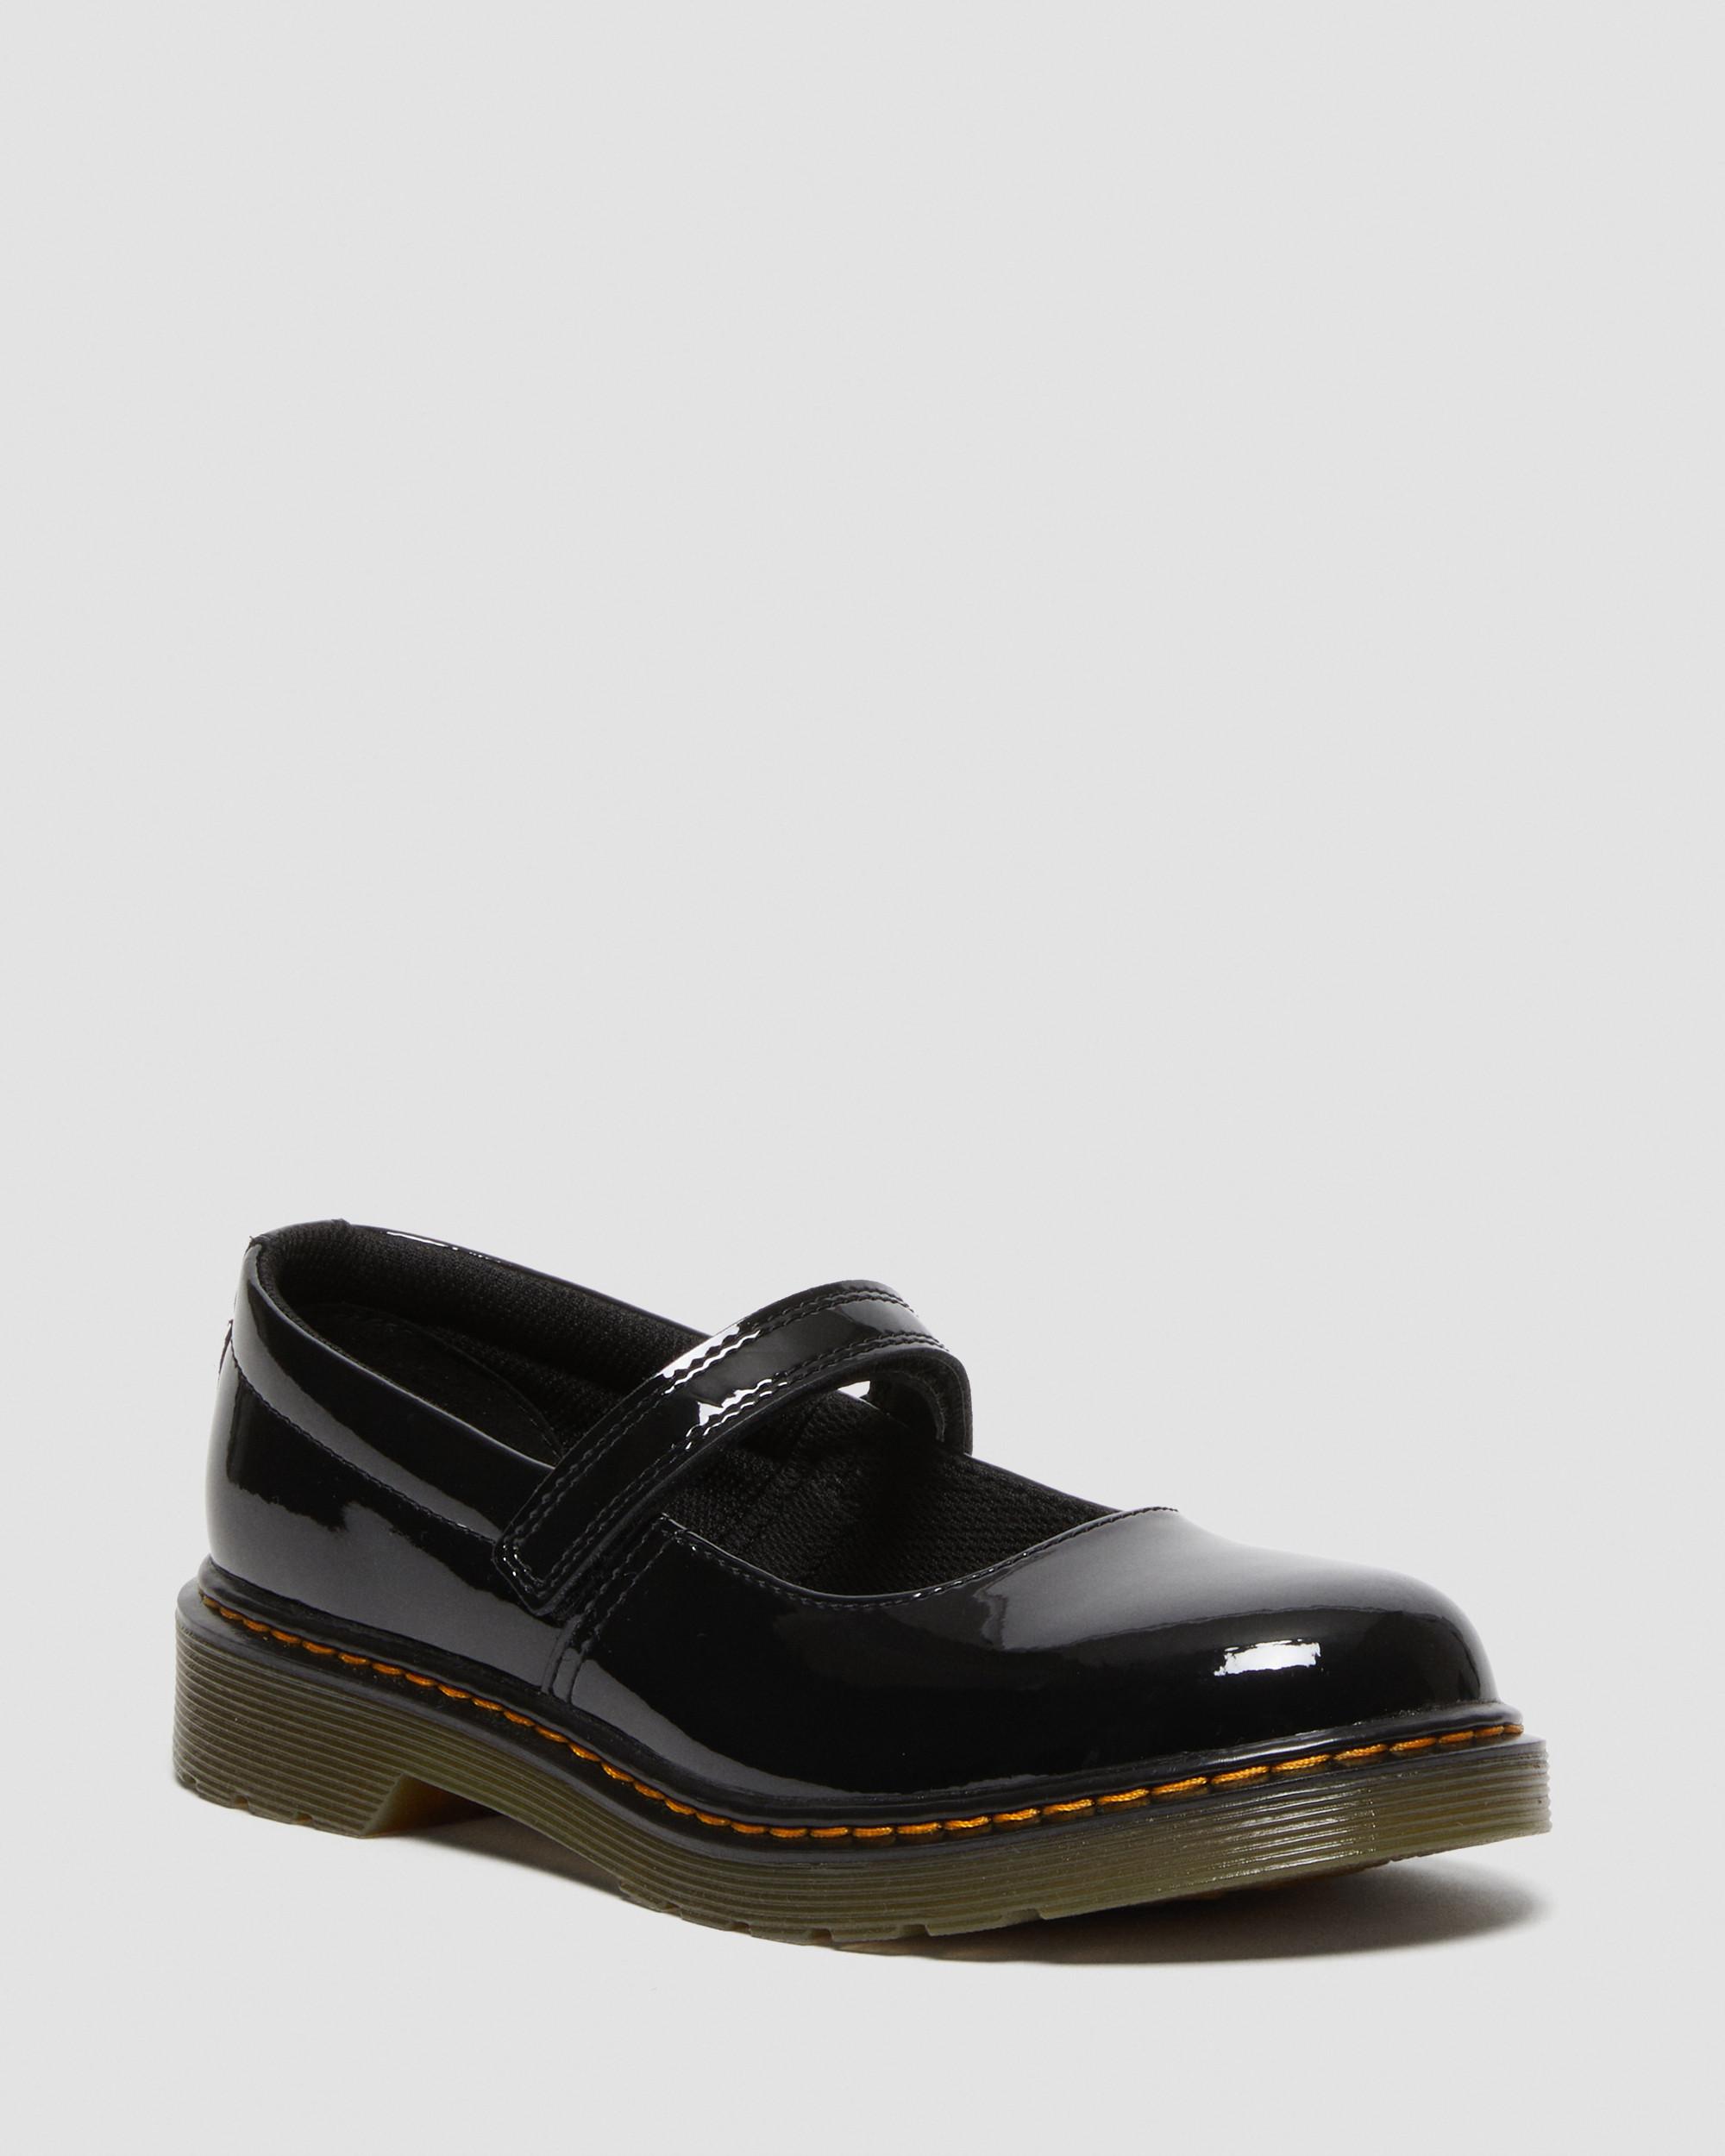 Youth Maccy Patent Leather Mary Jane Shoes